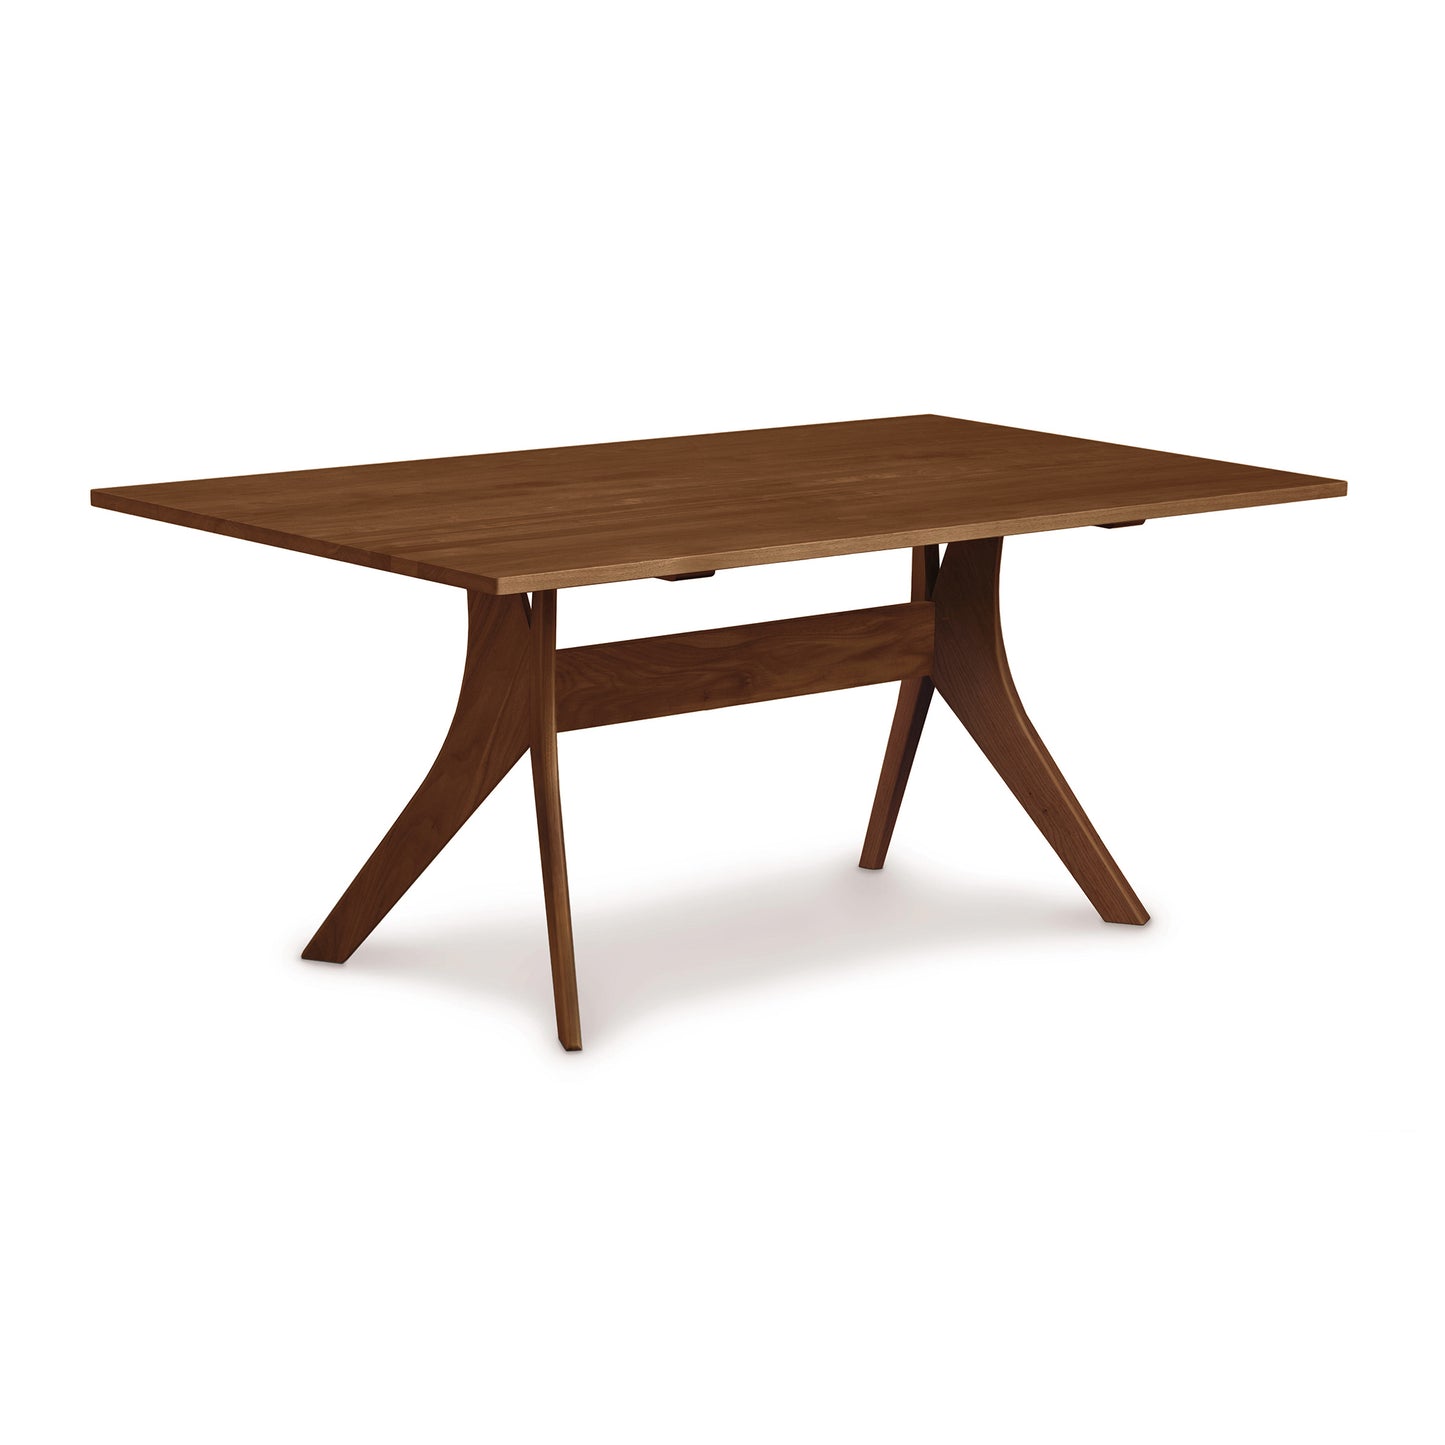 An Audrey Solid Top Dining Table by Copeland Furniture, with a solid hardwood top and legs.